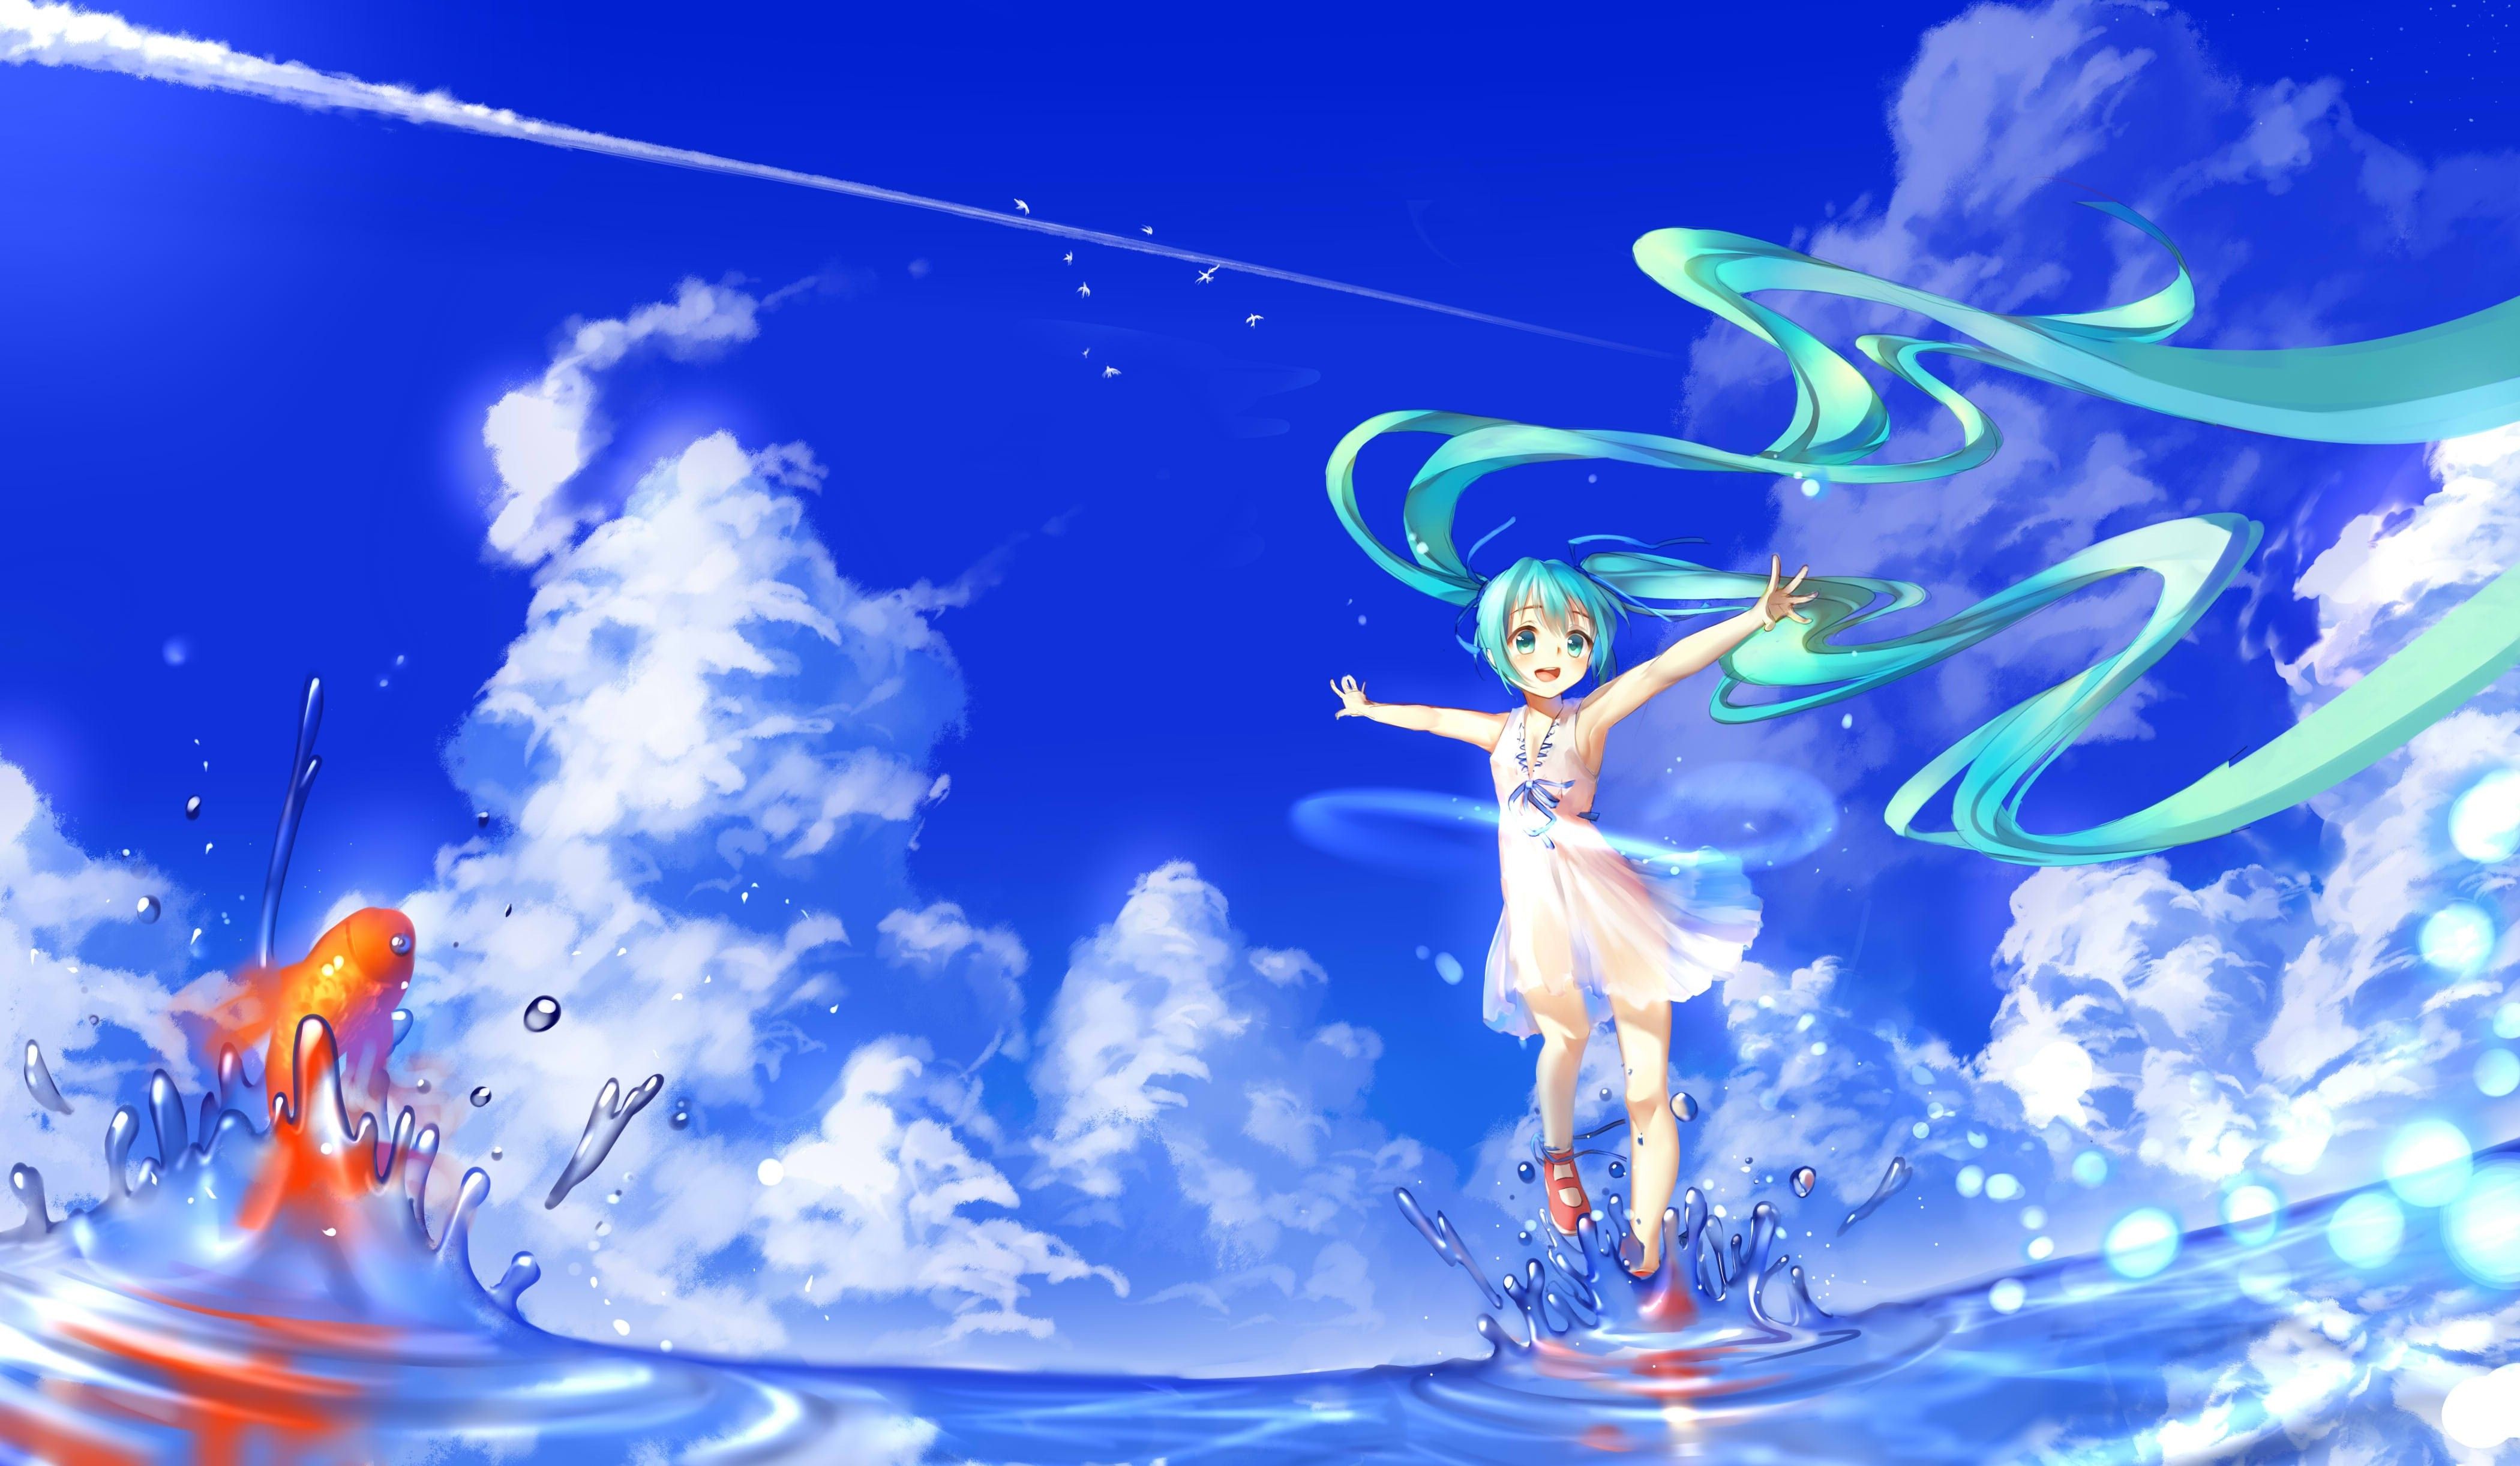 anime Girls, Vocaloid, Hatsune Miku, Twintails, Clouds, Sky, Water